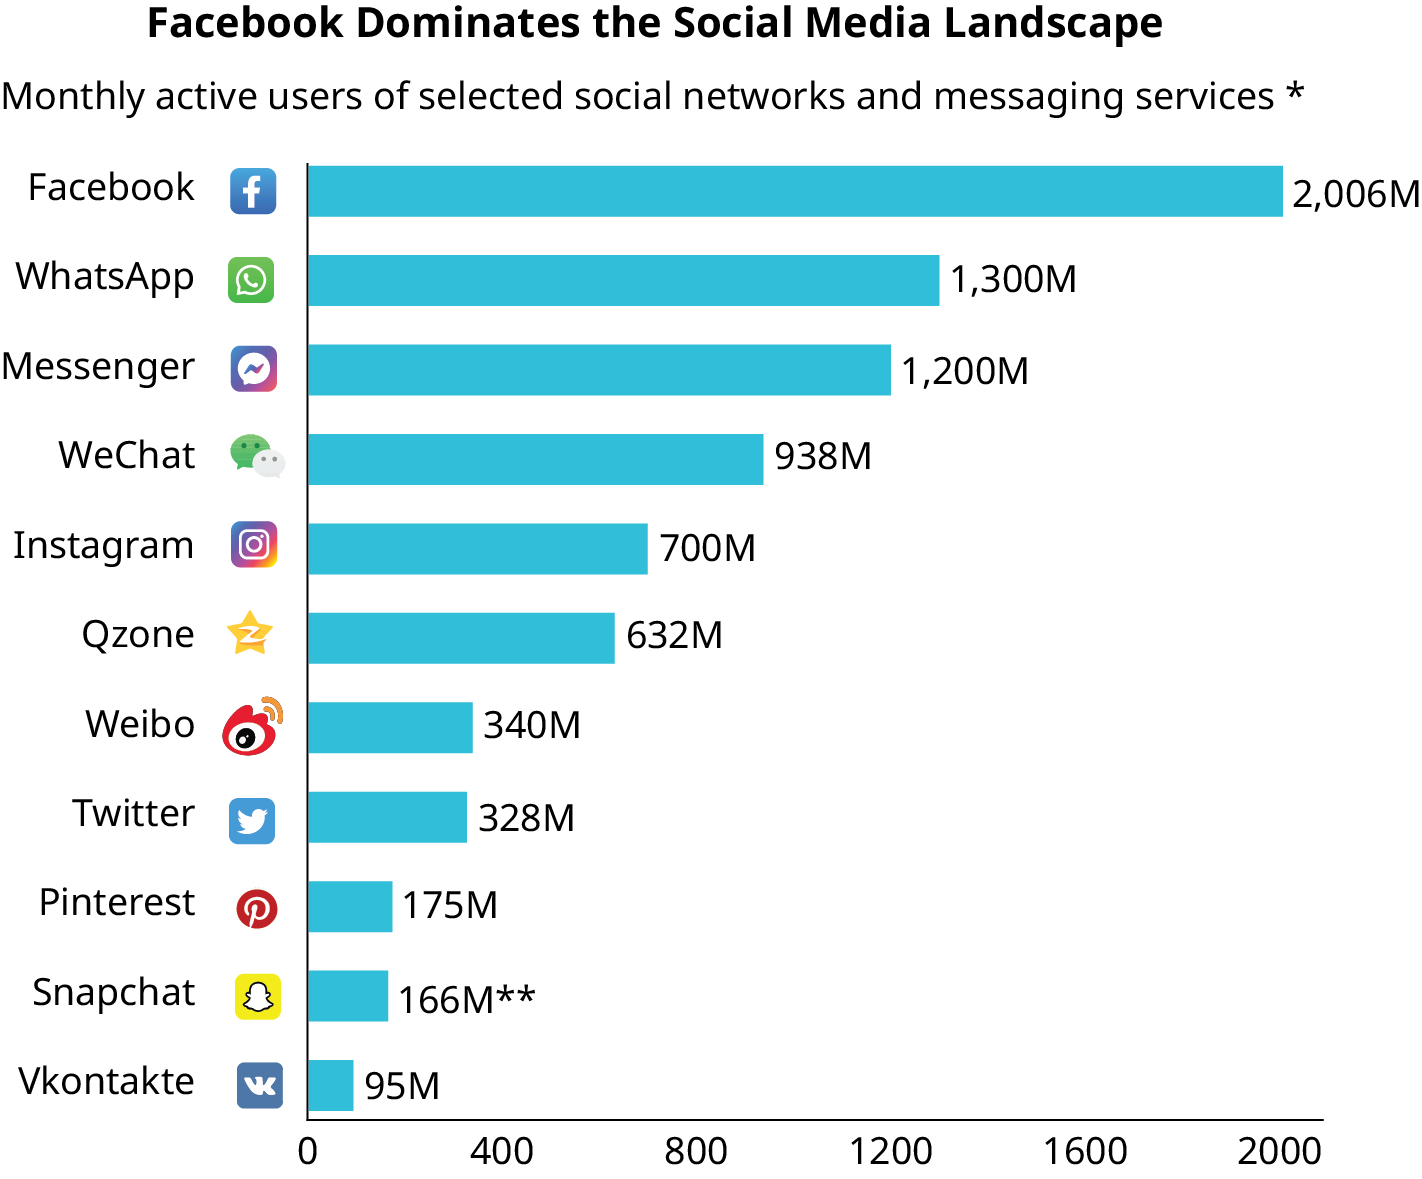 A bar graph titled Facebook Dominates the Social Media Landscape displays monthly active users of selected social networks and messaging services. Numbers represent million. The x-axis ranges from 0 to 2000, in increments of 400.The following social media apps are displayed: Facebook (2,006), WhatsApp (1,300), Messenger (1,200), WeChat (938), Instagram (700), Qzone (632), Weibo (340), Twitter (328), Pinterest (175), Snapchat (166), Vkontakte (95).